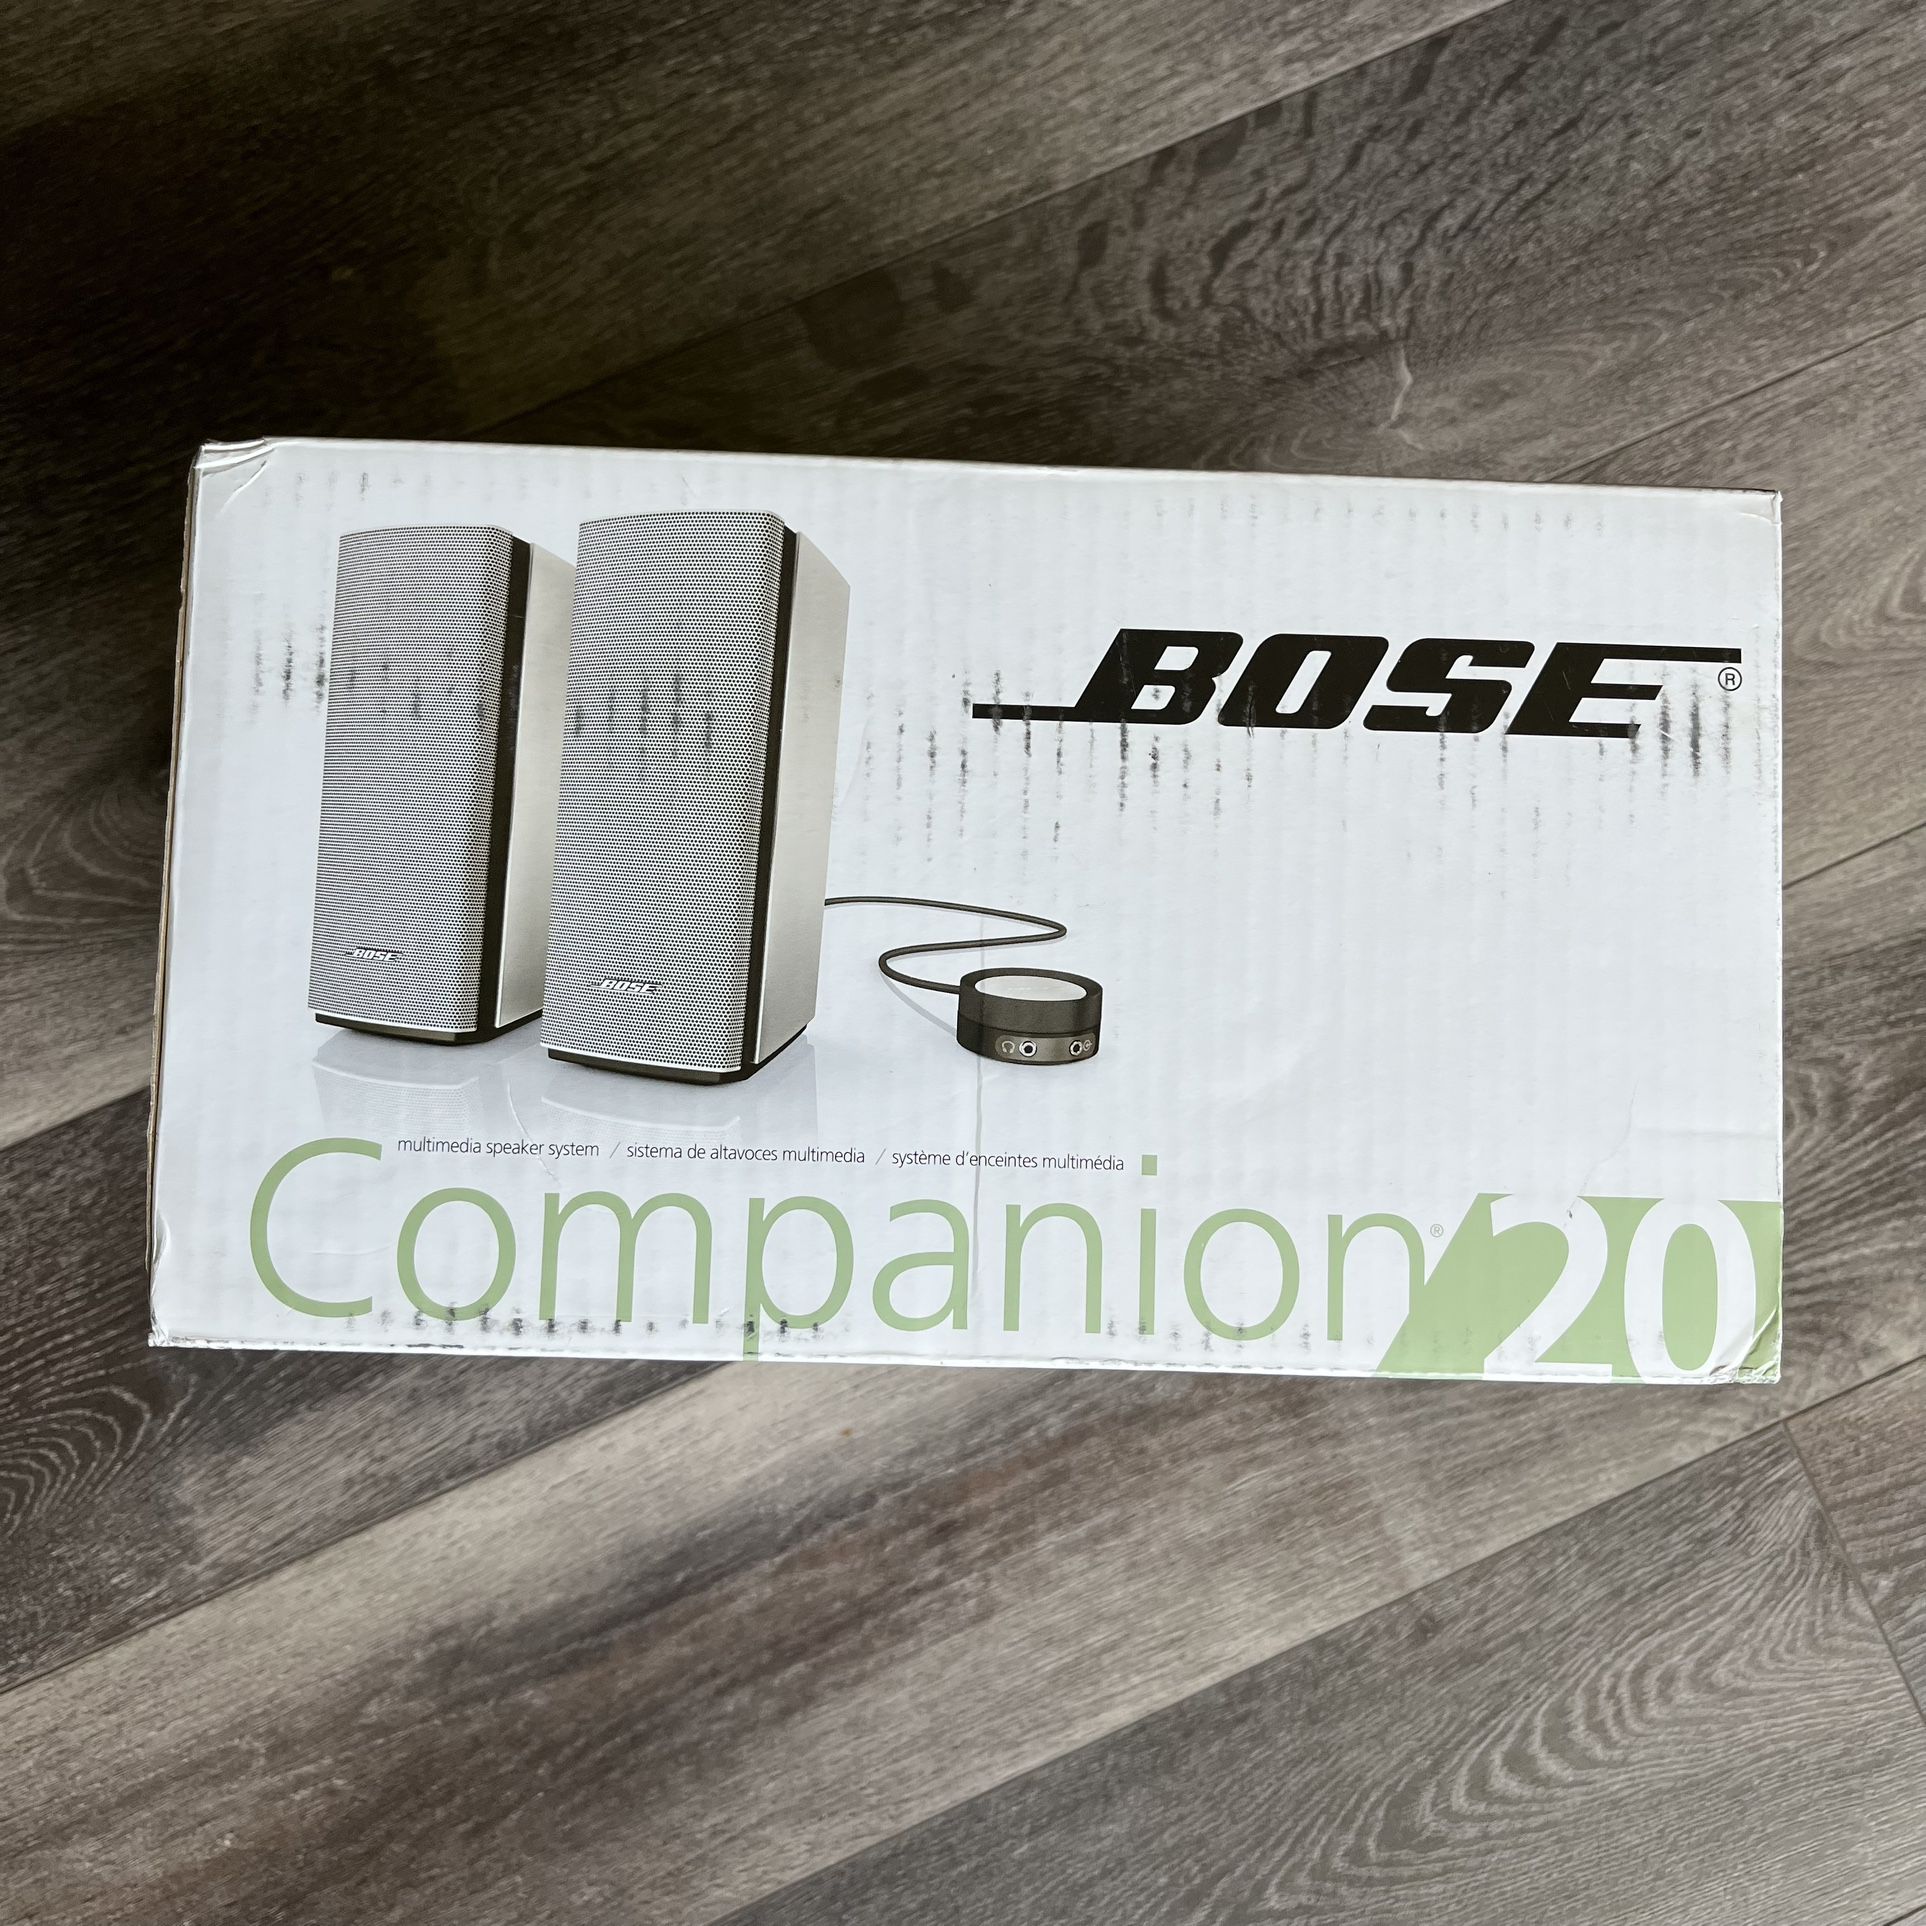 Bose Companion 20 Multimedia Speaker System Brand New in Box Complete 2 Speakers and Control Pod